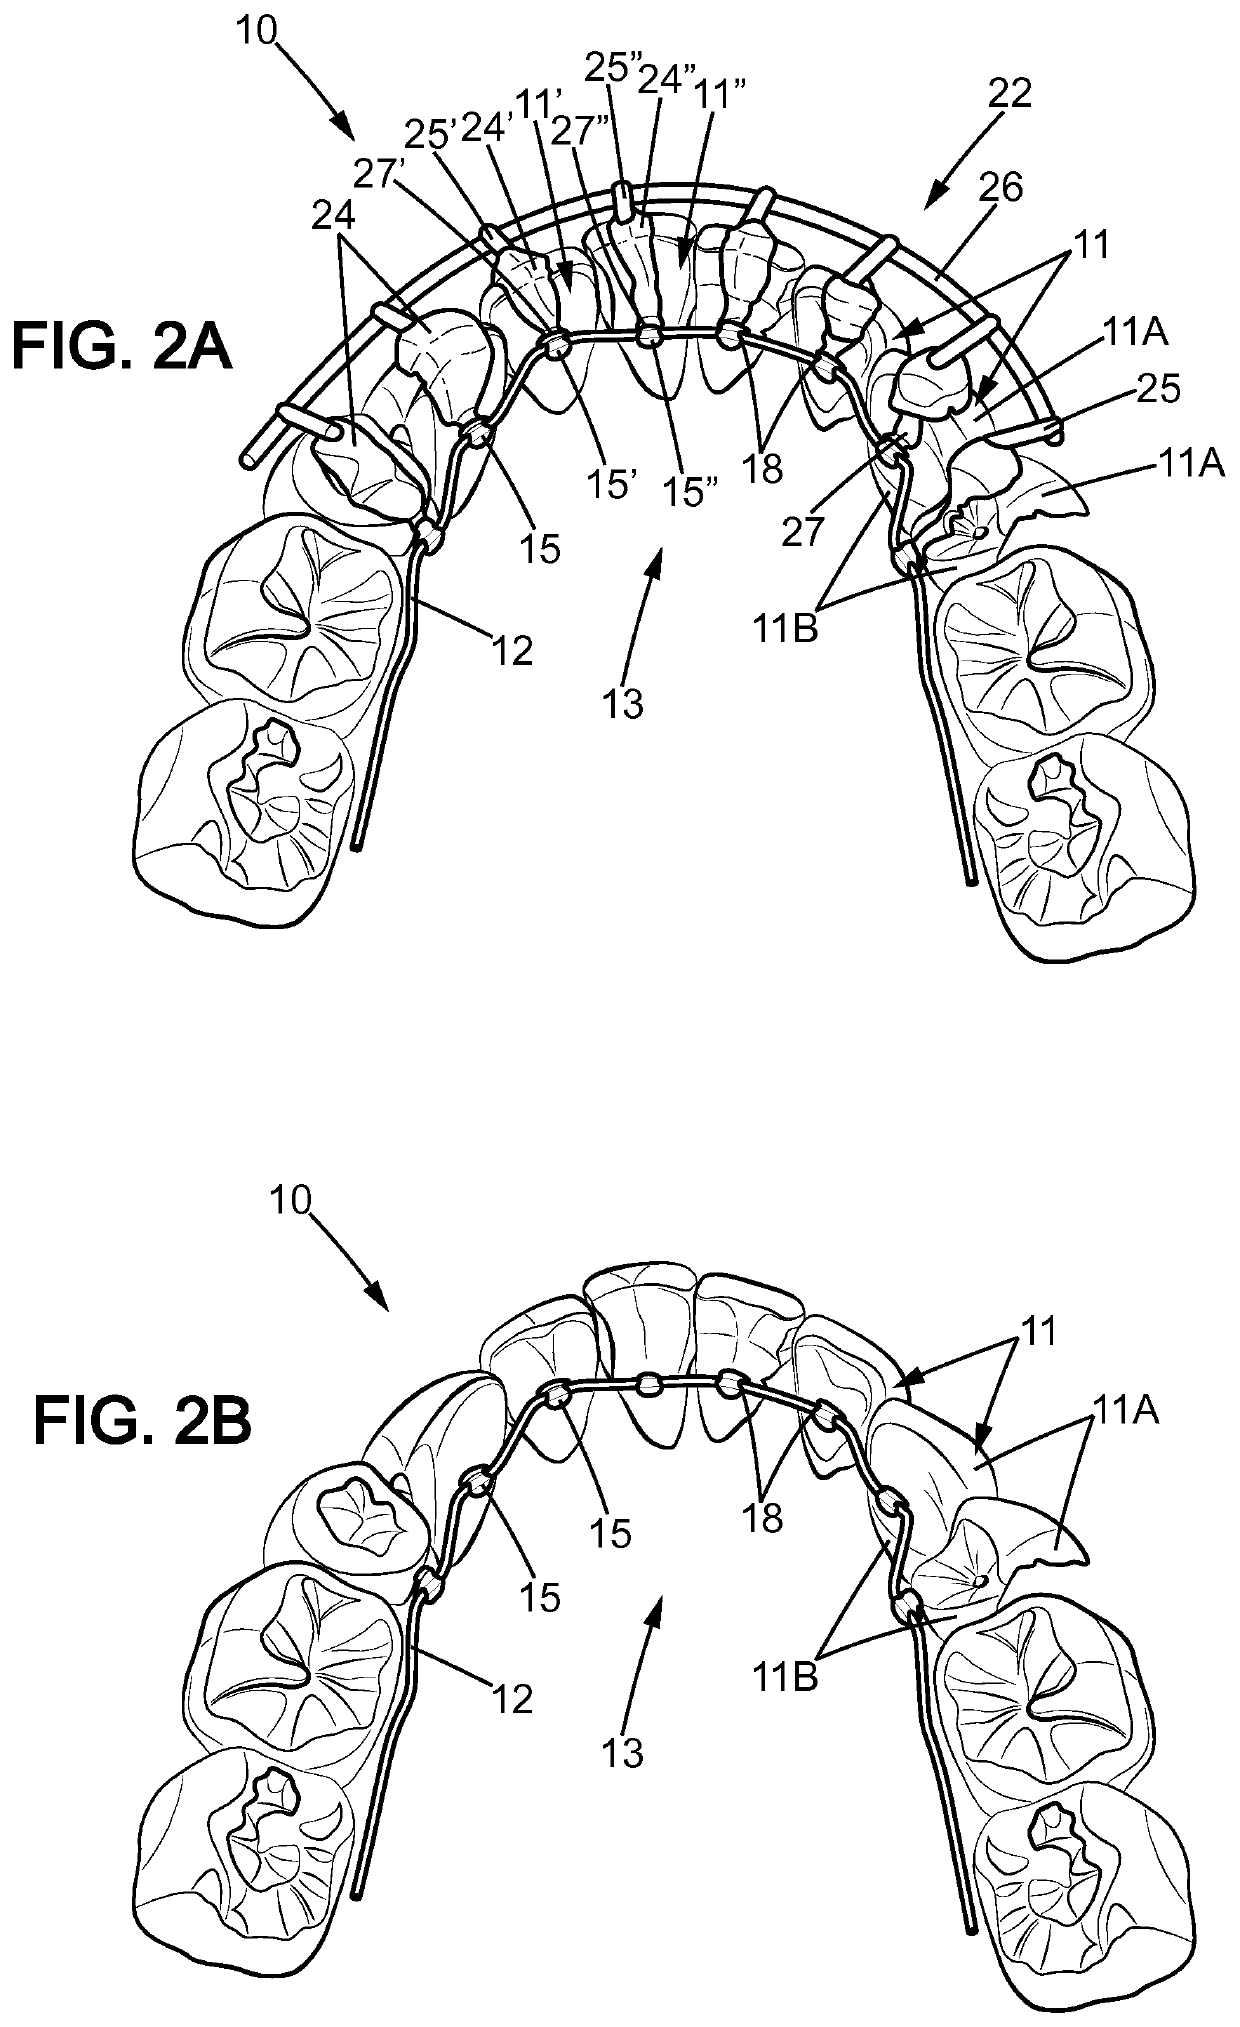 An orthodontic system for the orthodontic treatment of a patient's teeth, a method for the placement of an appliance for the orthodontic treatment of a patient's teeth, and a use of the appliance of such an orthodontic system